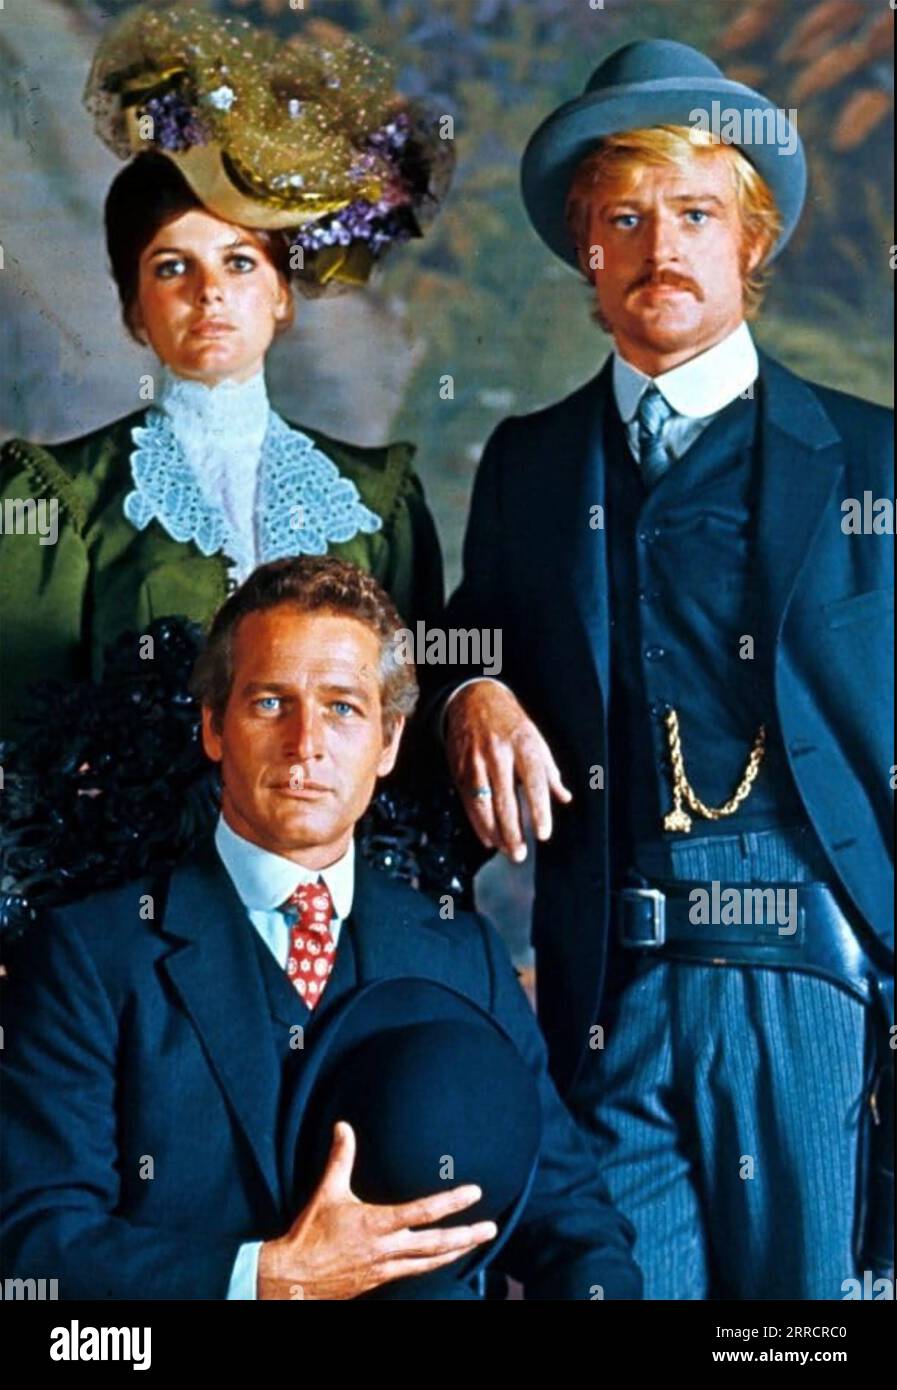 BUTCH CASSIDY AND THE SUNDANCE KID 1969 20th Century Fox film with Paul Newman (seated) as Butch, Robert Redford as Sundance and  and Katherine Ross as Etta Place Stock Photo